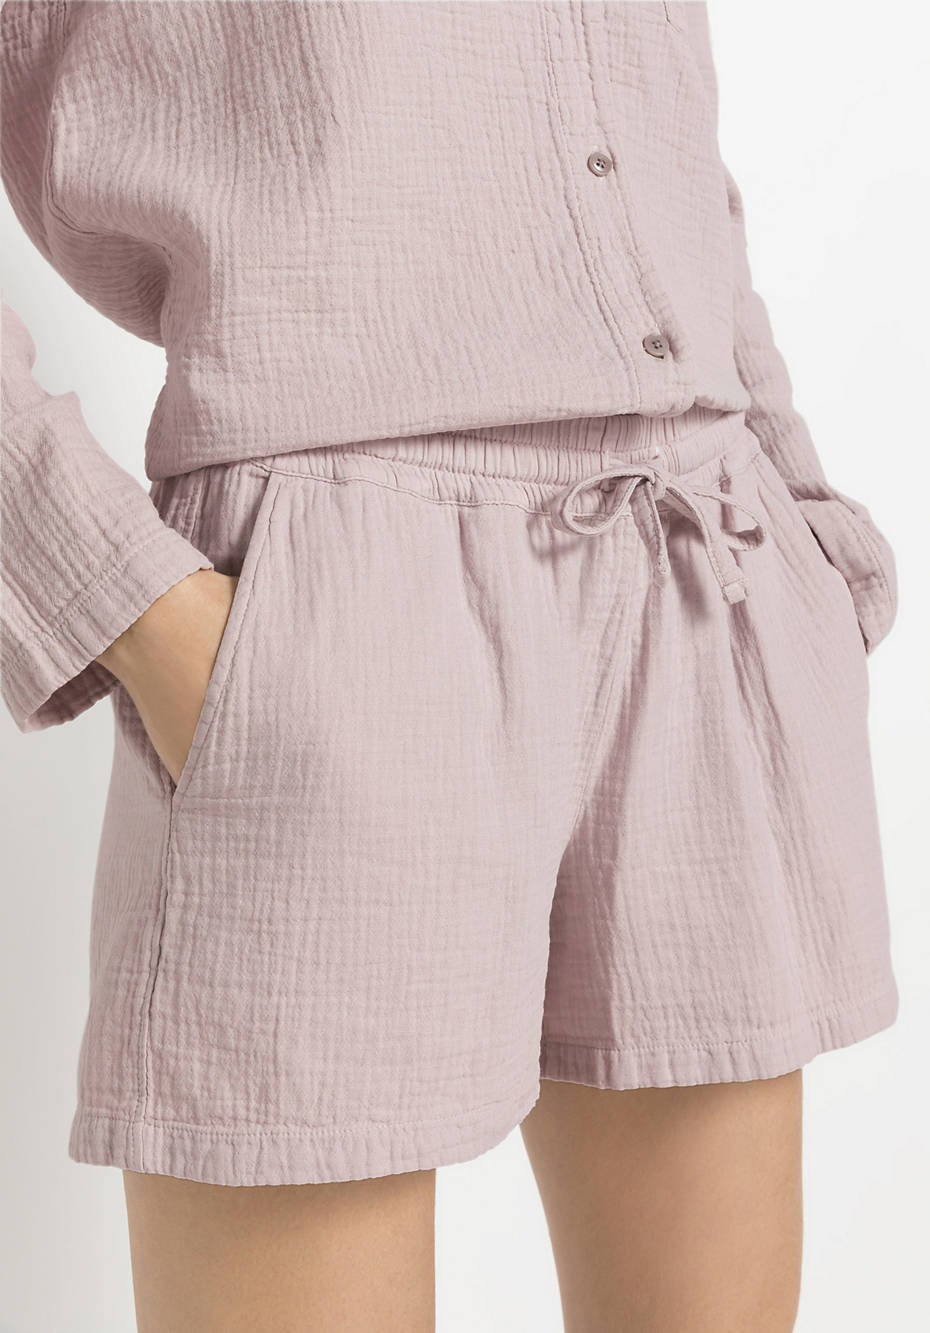 Muslin shorts made from pure organic cotton